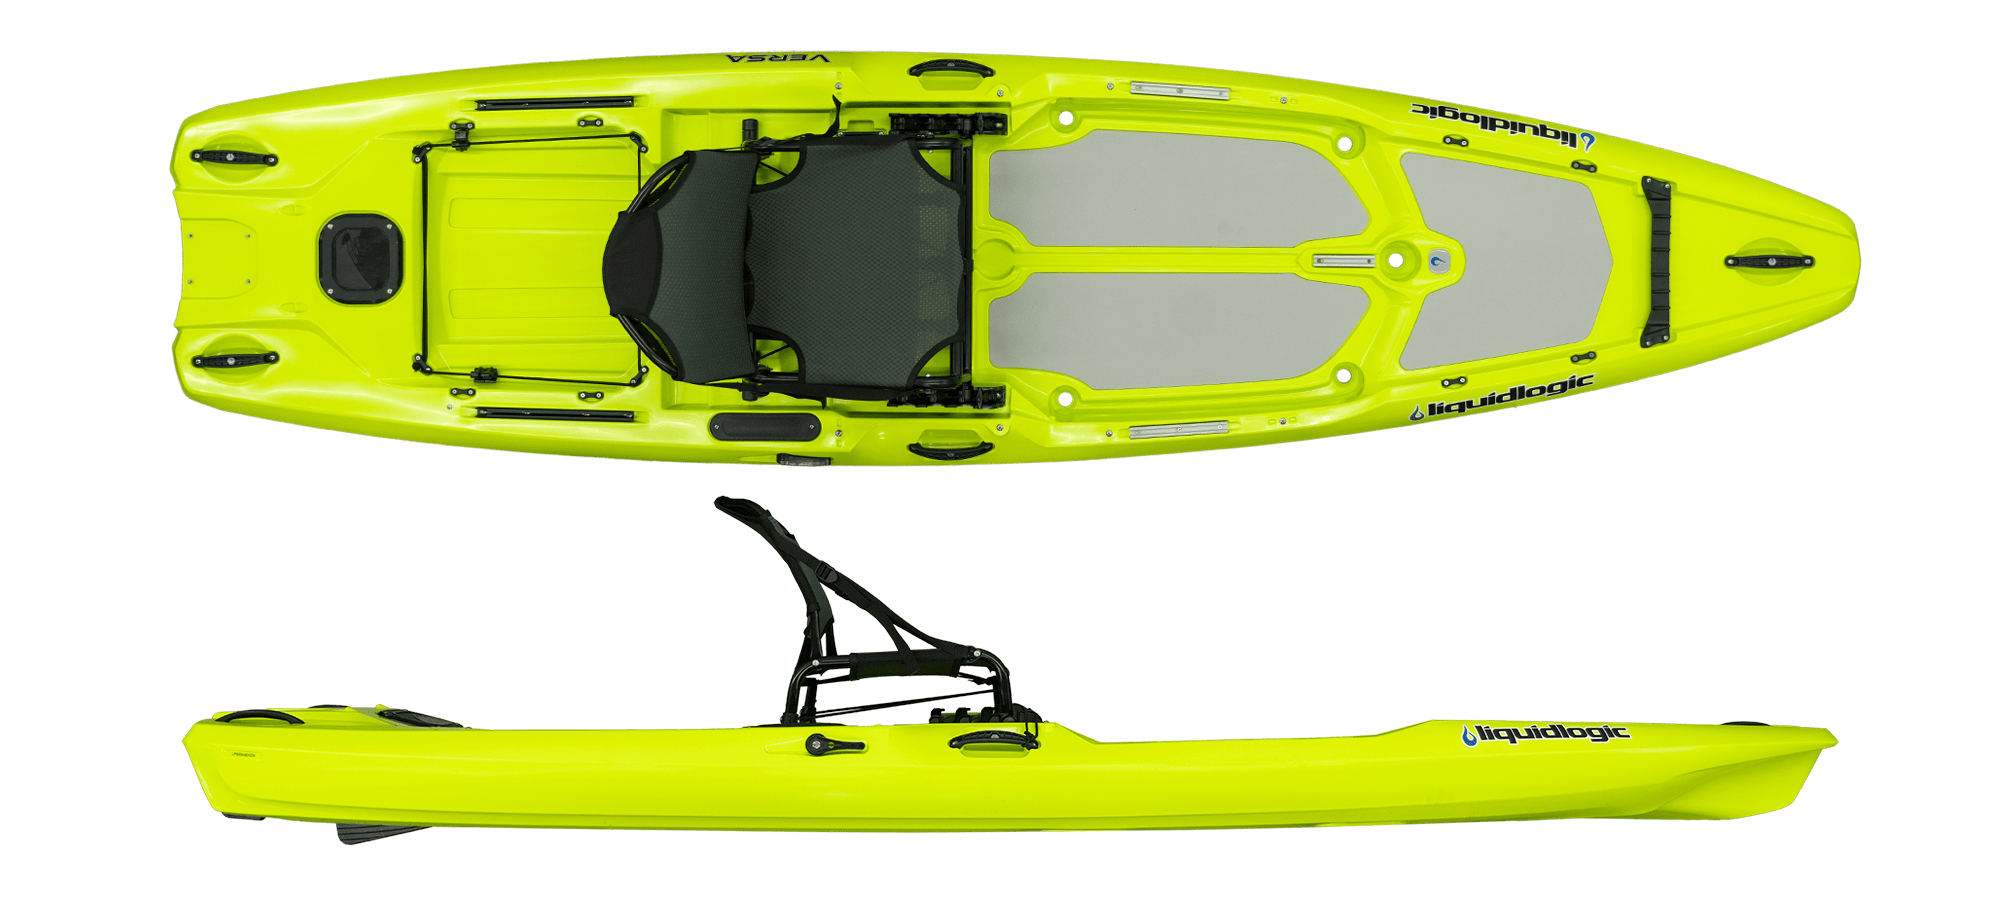 Exciting ocean kayaks for sale For Thrill And Adventure 